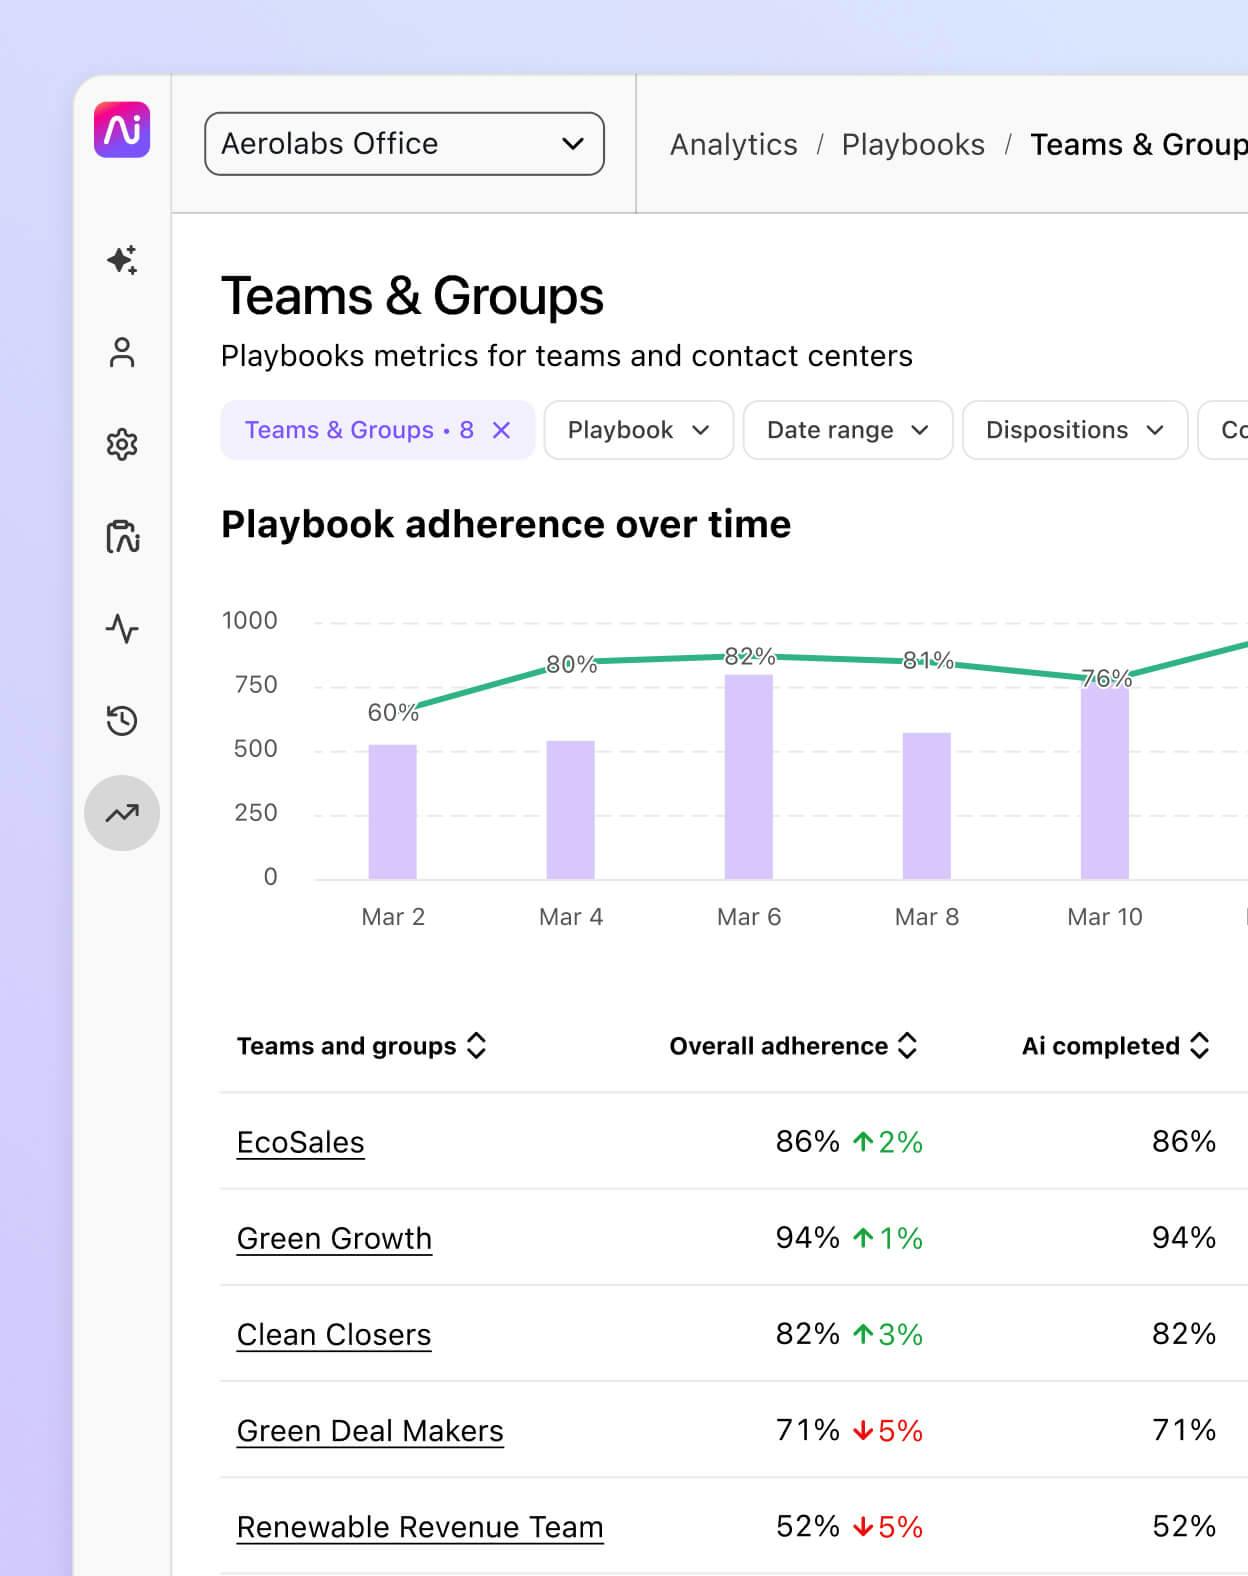 Screenshot of playbooks metrics for teams and contact centers